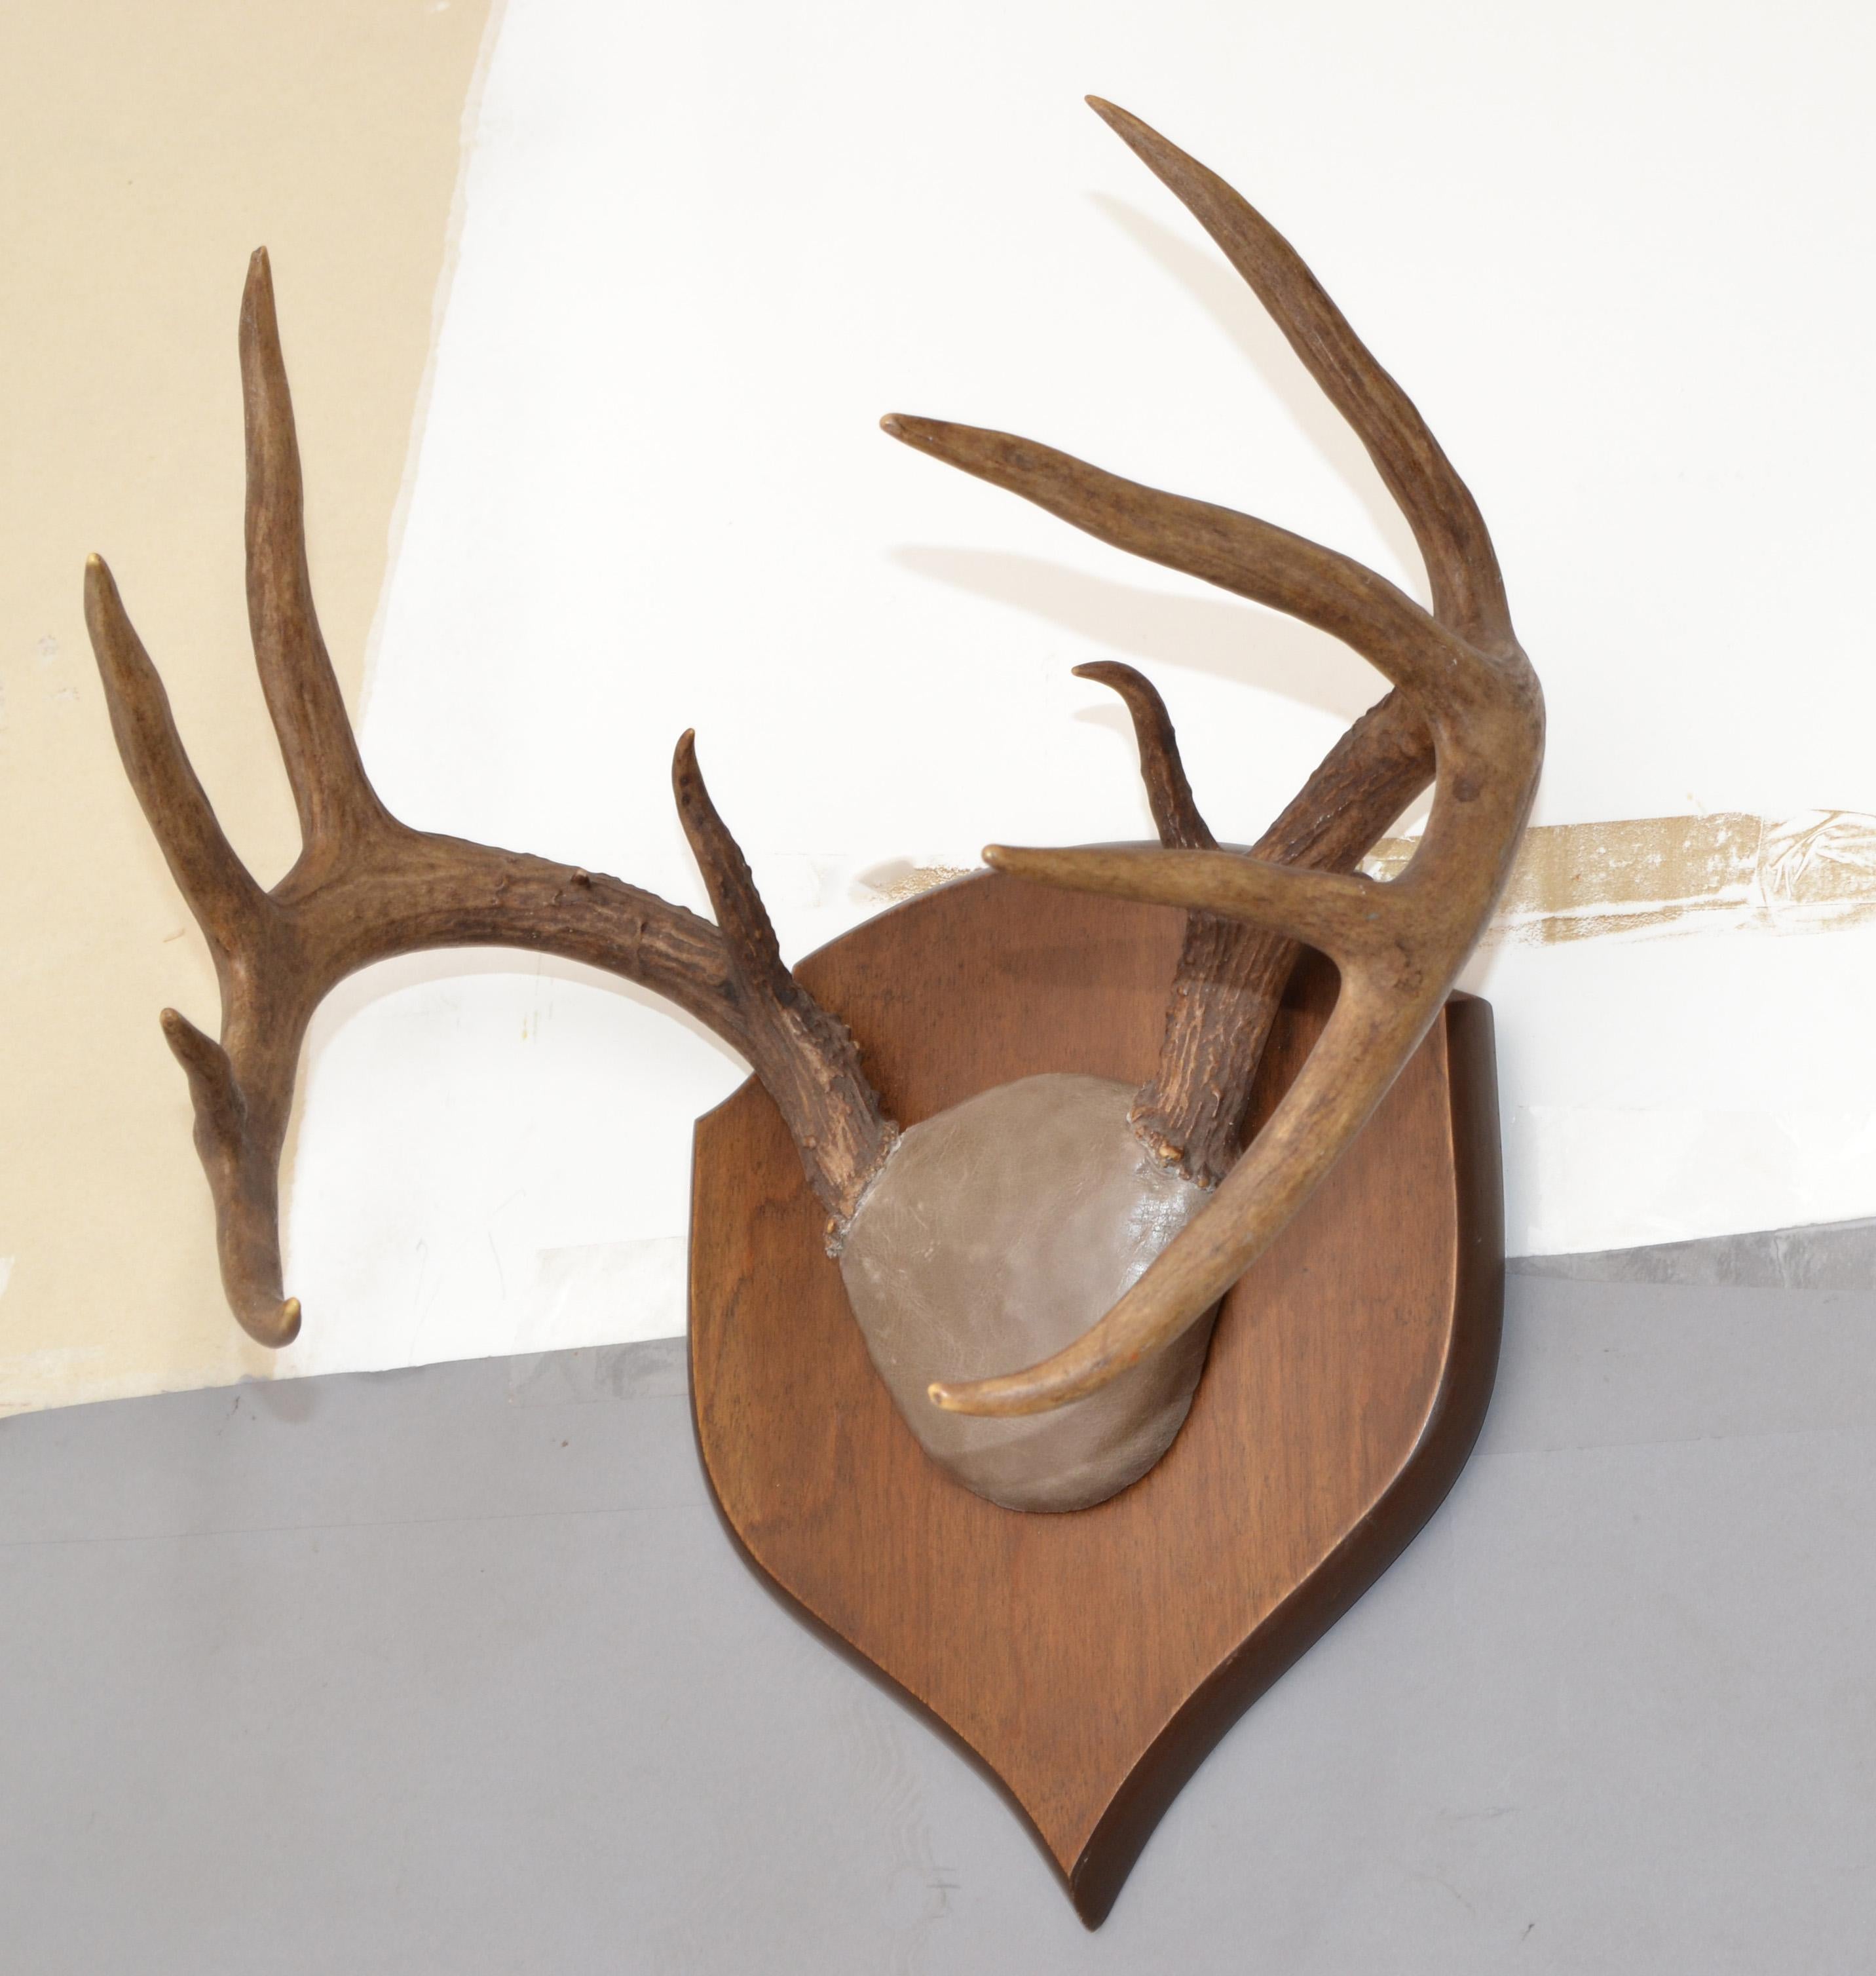 Mid-Century Modern white tail deer buck antlers, horns on a dark brown wooden wall-mounted plaque.
Superbe plaque de taxidermie, sculpture murale pour les chasseurs.